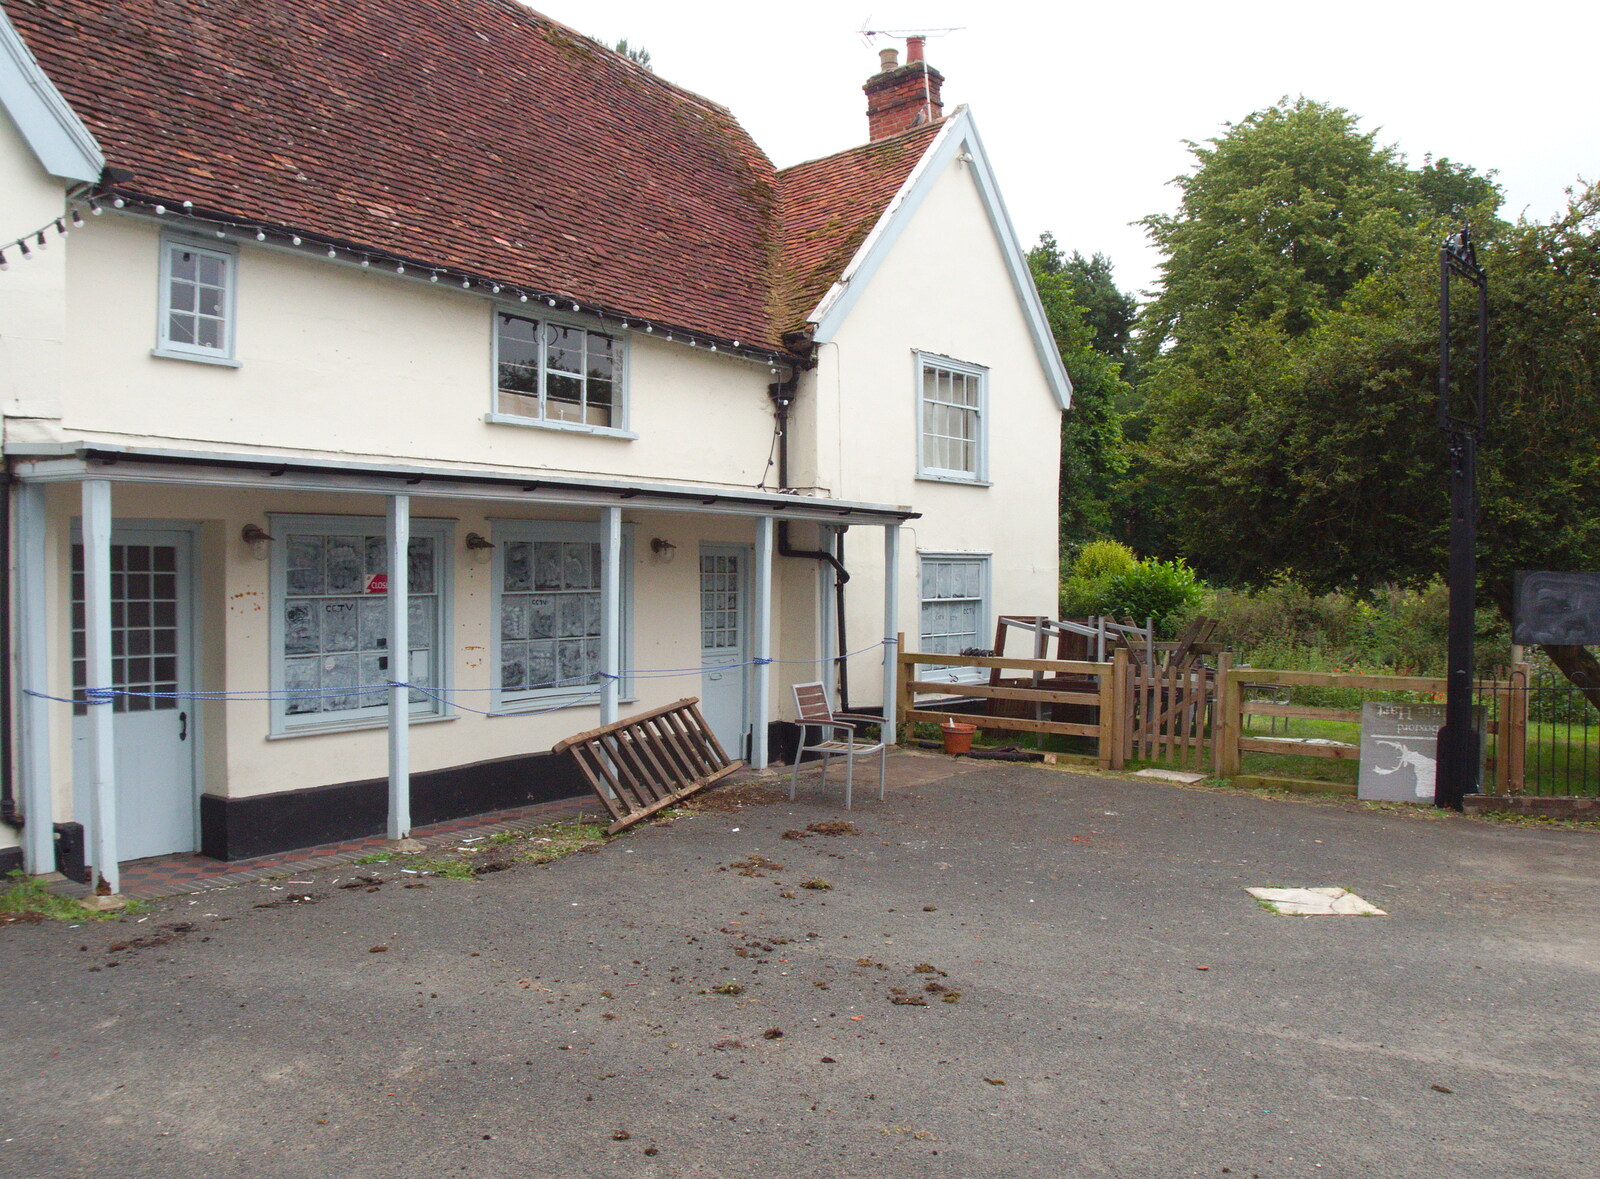 A Postcard from Boxford and BSCC at Pulham, Suffolk and Norfolk - 13th July 2019: The sad sight of the closed-down White Hart